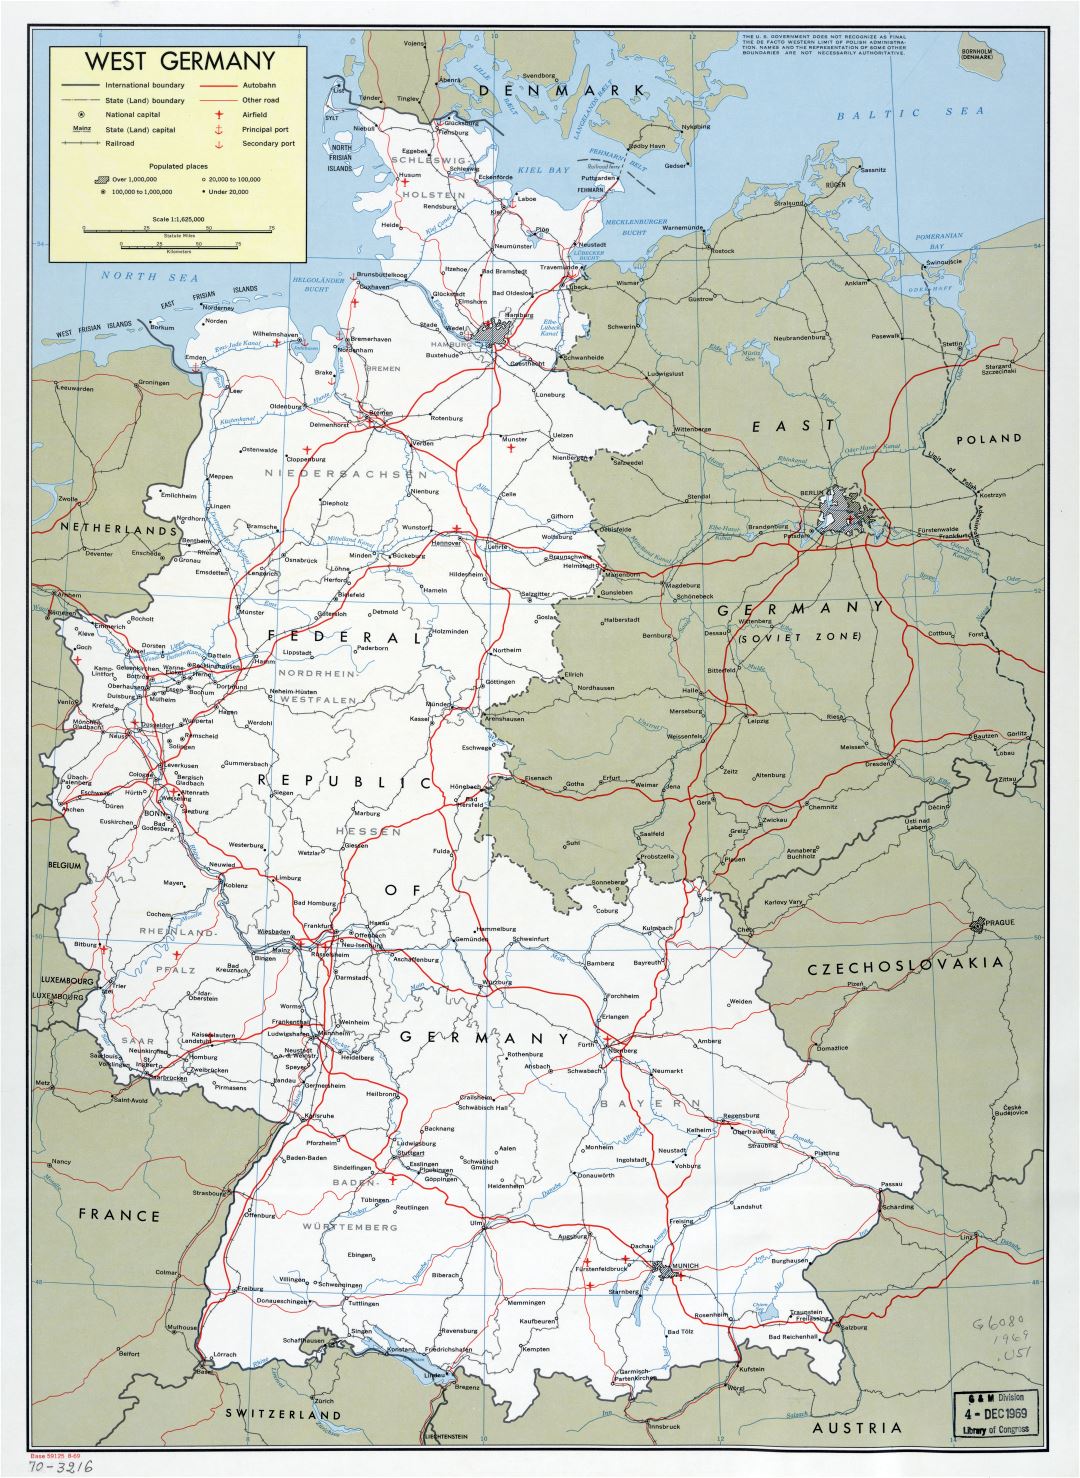 Large scale political and administrative map of West Germany with marks of cities, roads, railroads, airfield and seaports - 1969